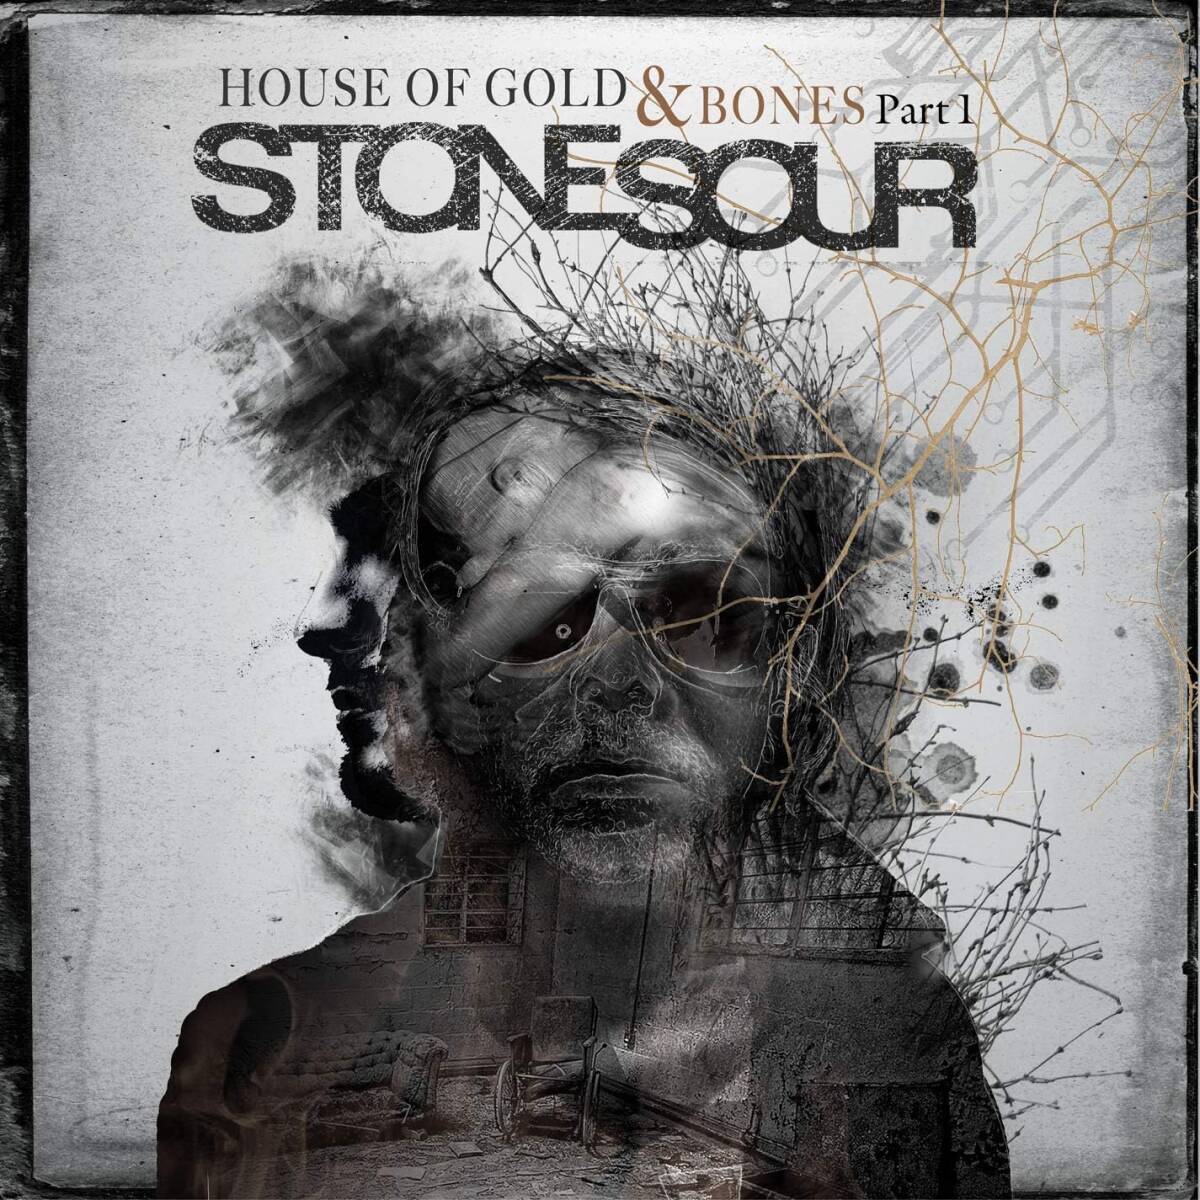 The House of Gold & Bones Part ストーン・サワー　輸入盤CD_画像1